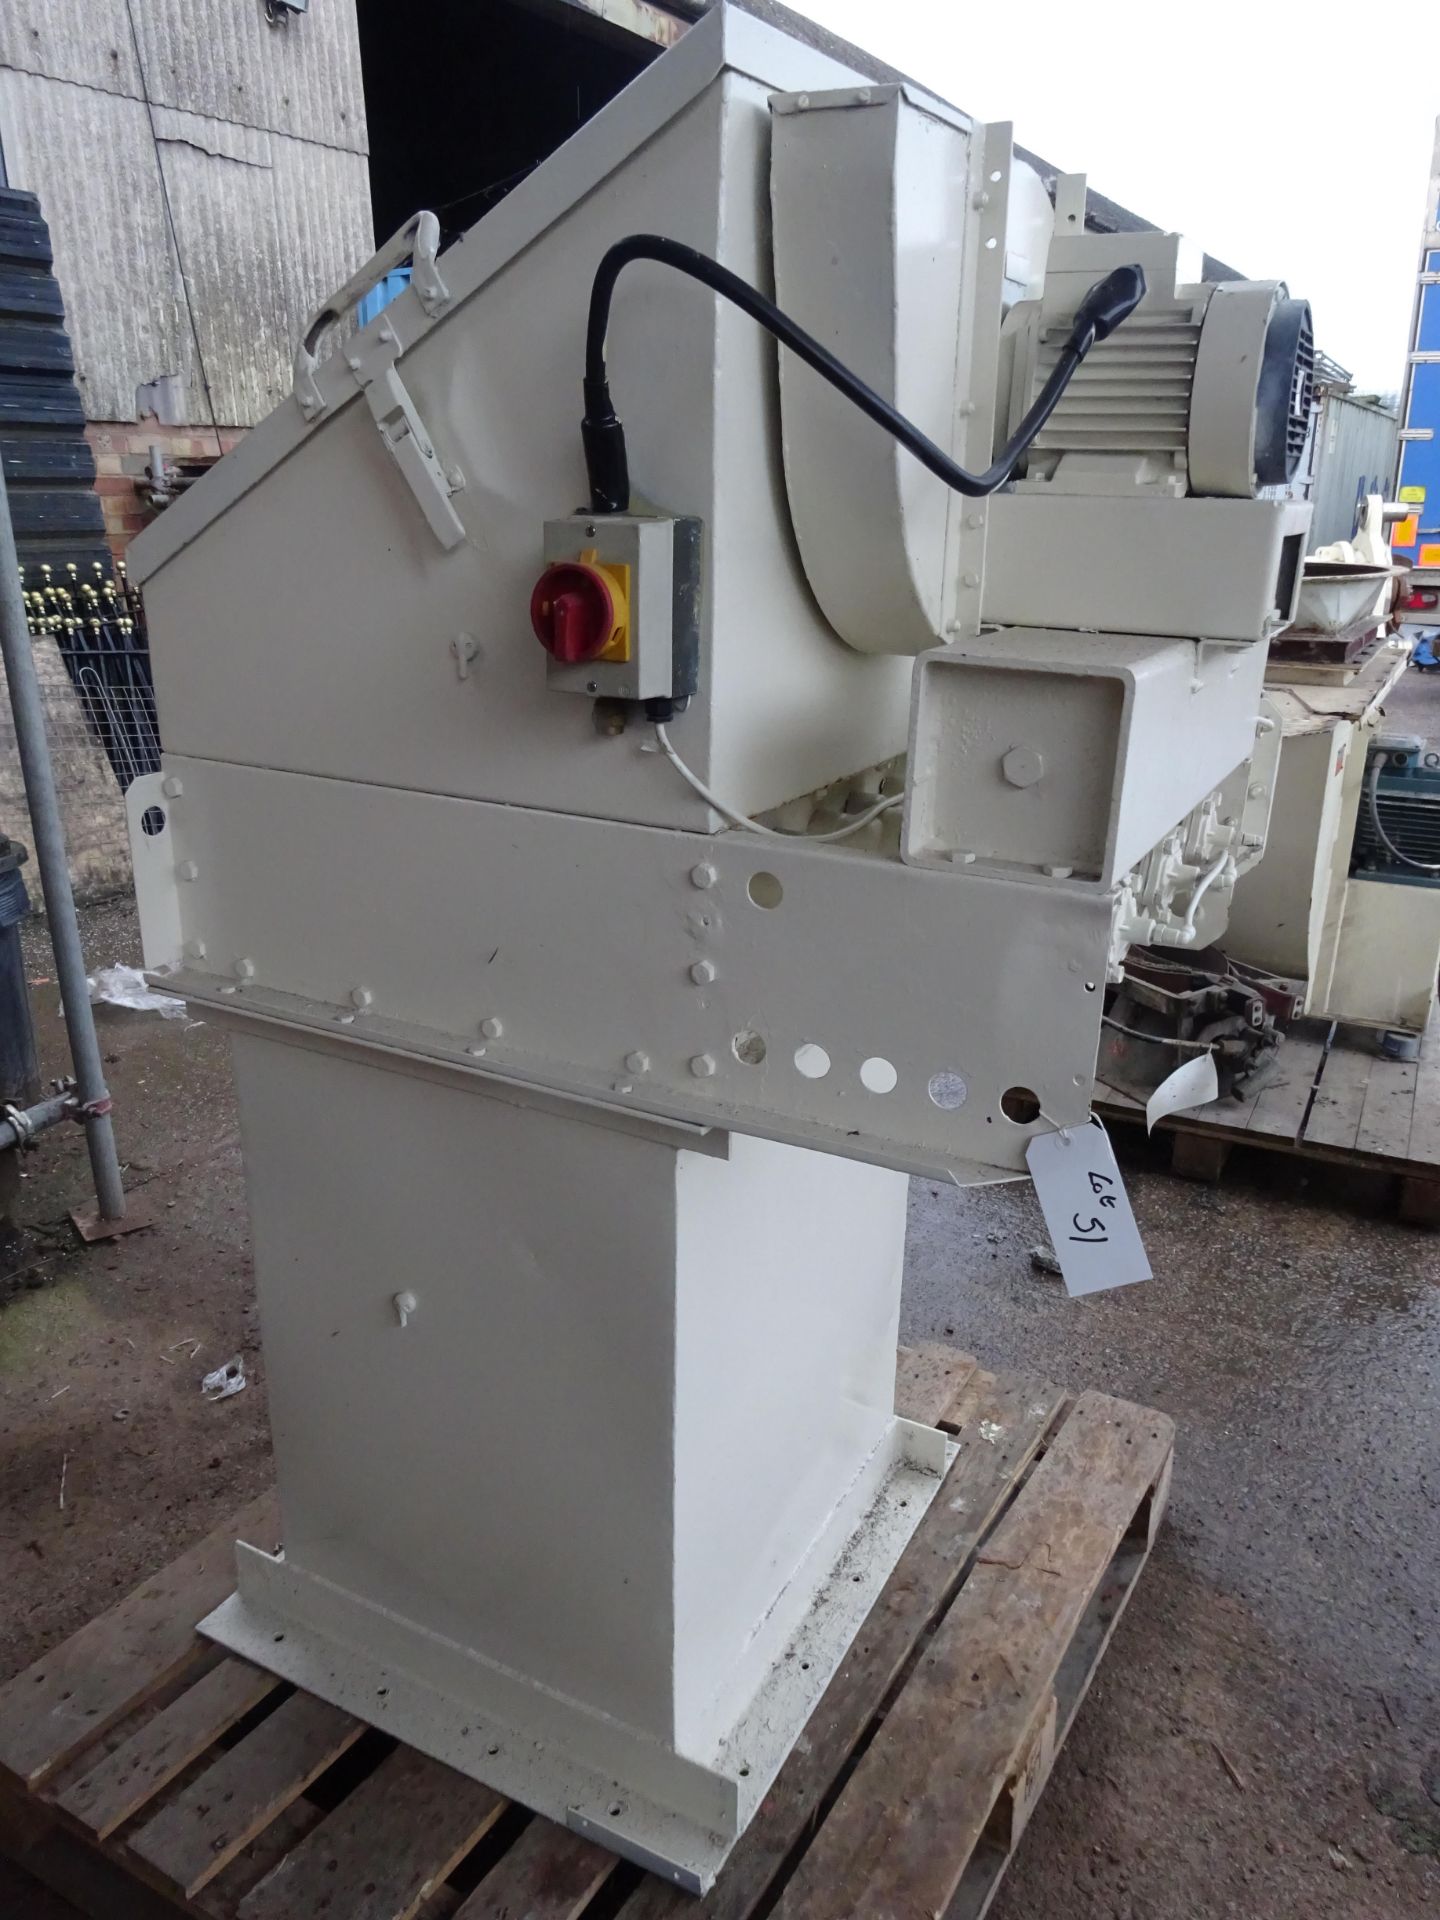 DCE DLM V4F Bag Dust Collector, 0.75kW motor, serial no. 14120, plant no. 51, free loading onto - Image 2 of 5